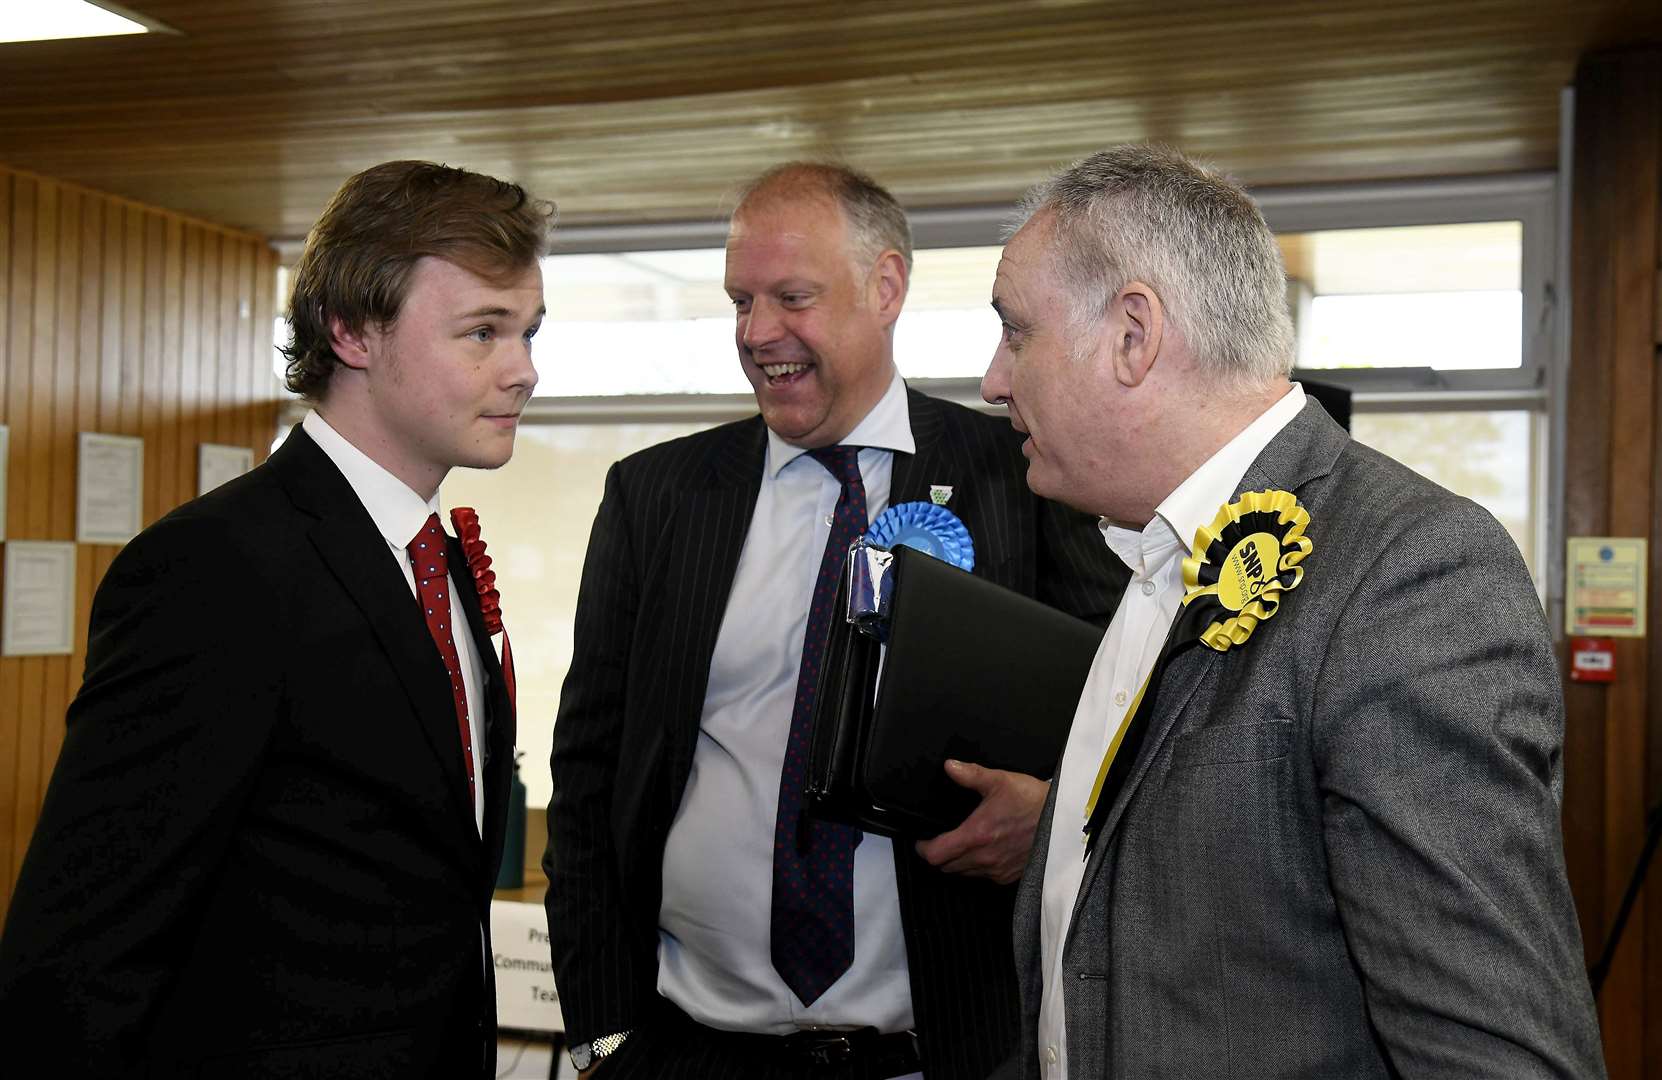 Cllr Neil McLennan (centre), co-leader of the Council and Moray Conservative group, with Labour Cllr Ben Williams (left) and Moray MSP Richard Lochhead at the local government election count last month.